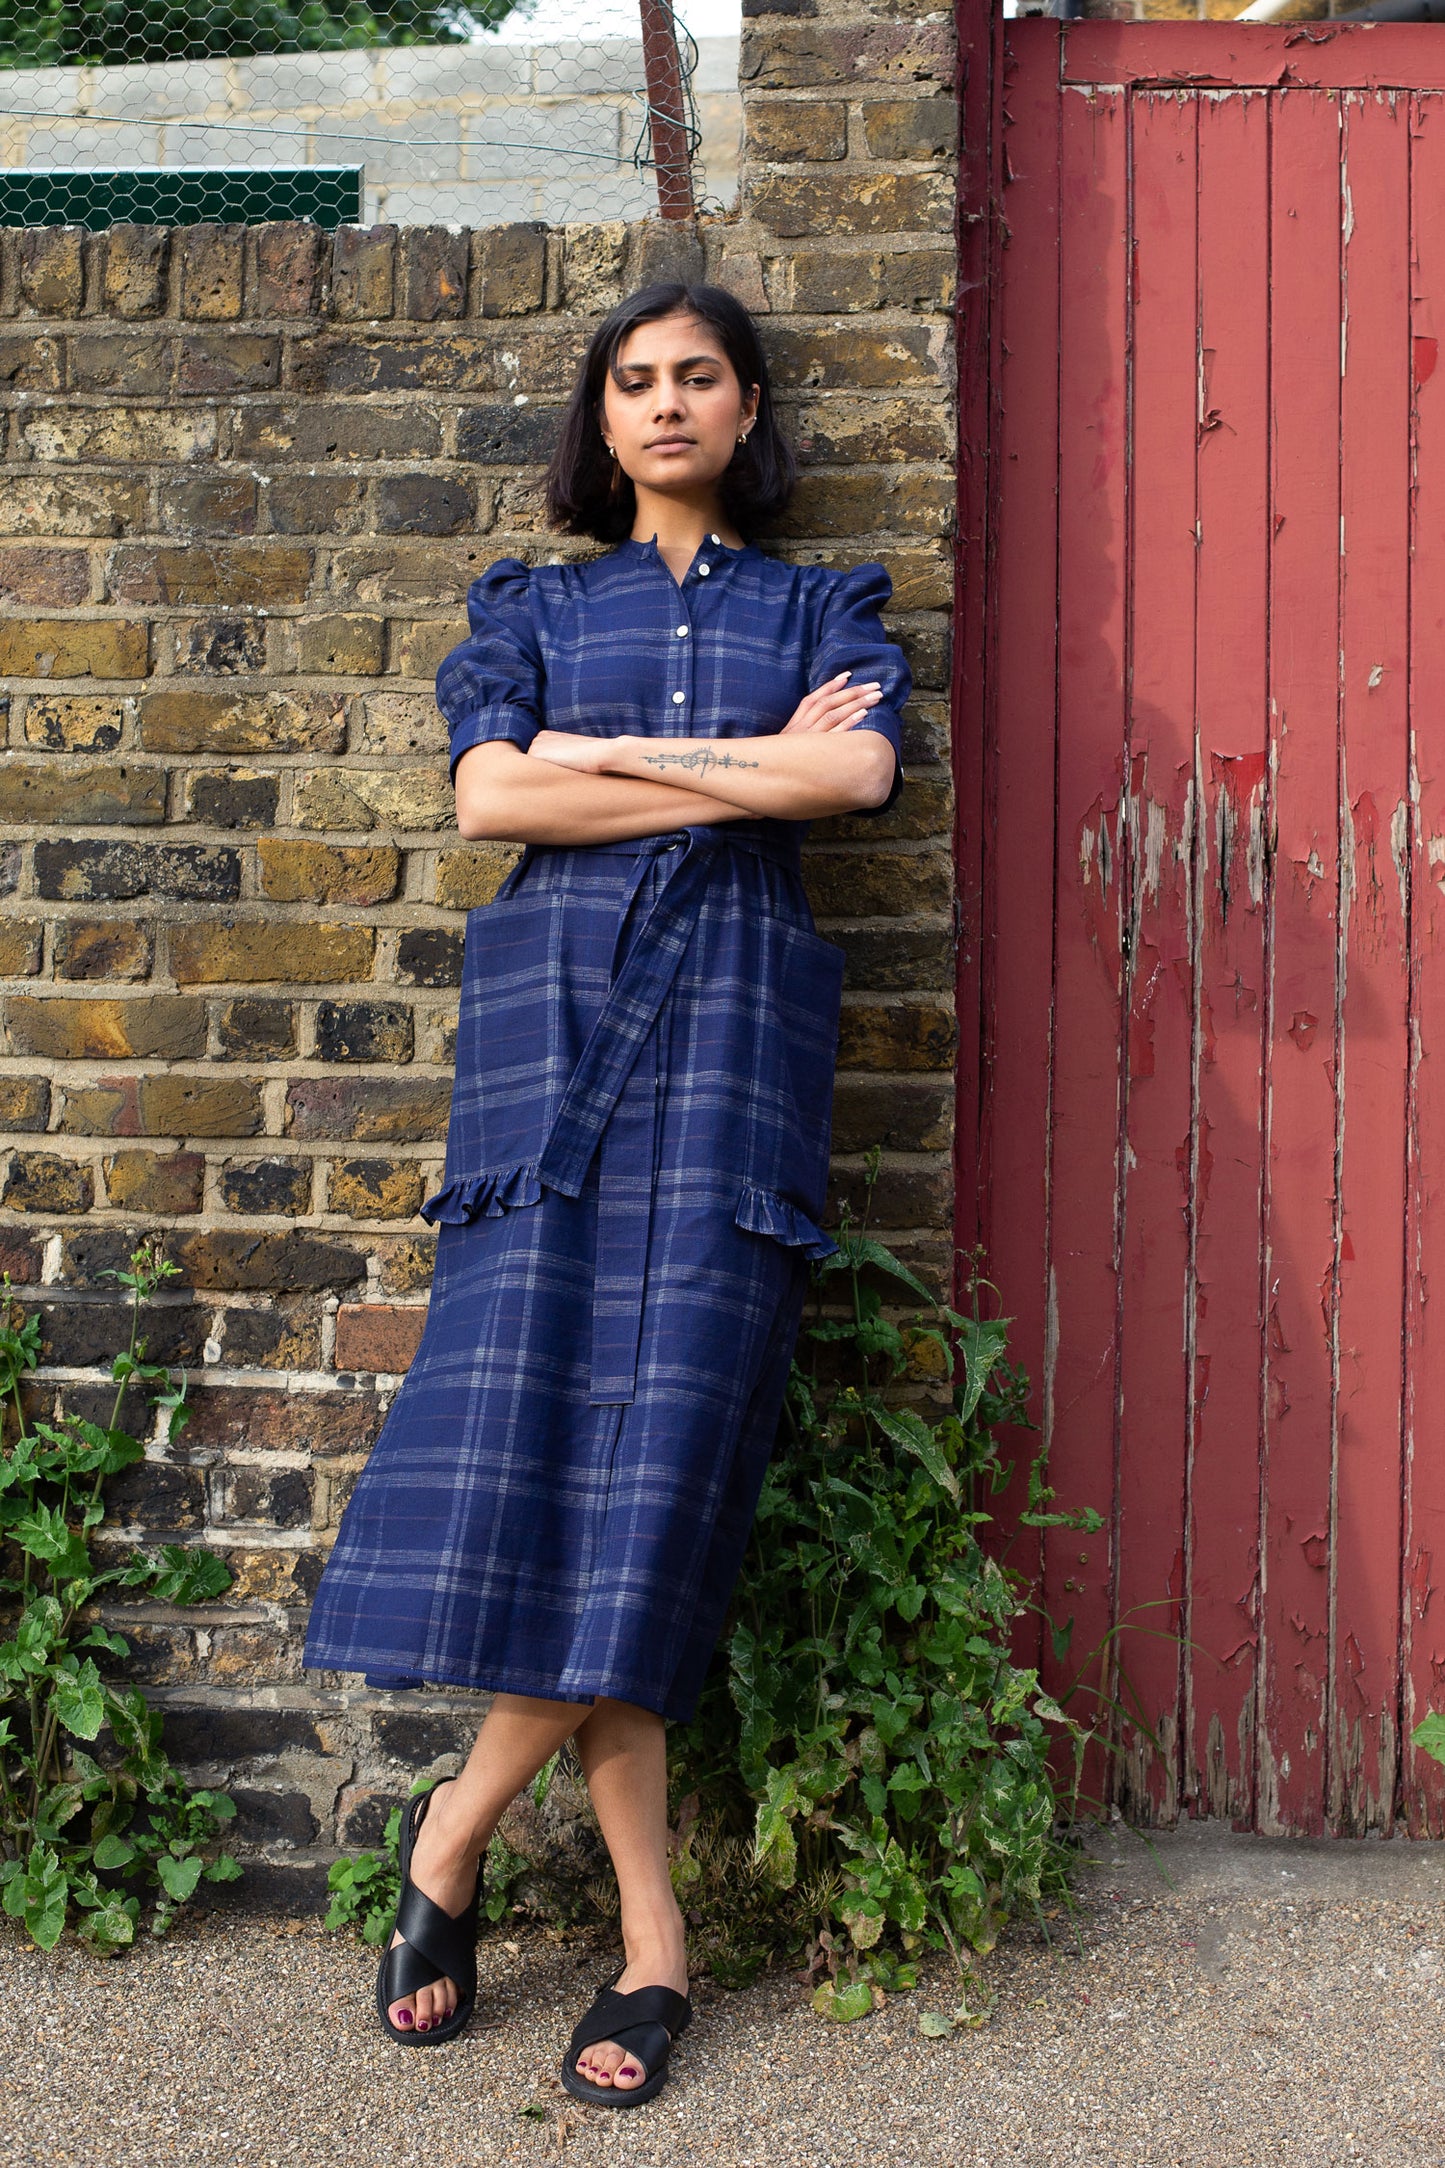 Model leans against a brick wall with a red gate door next to her. She has her arms folded and wears Saywood's Rosa puff sleeve dress in navy check with black sandals. Plants can be seen growing out near her feet.